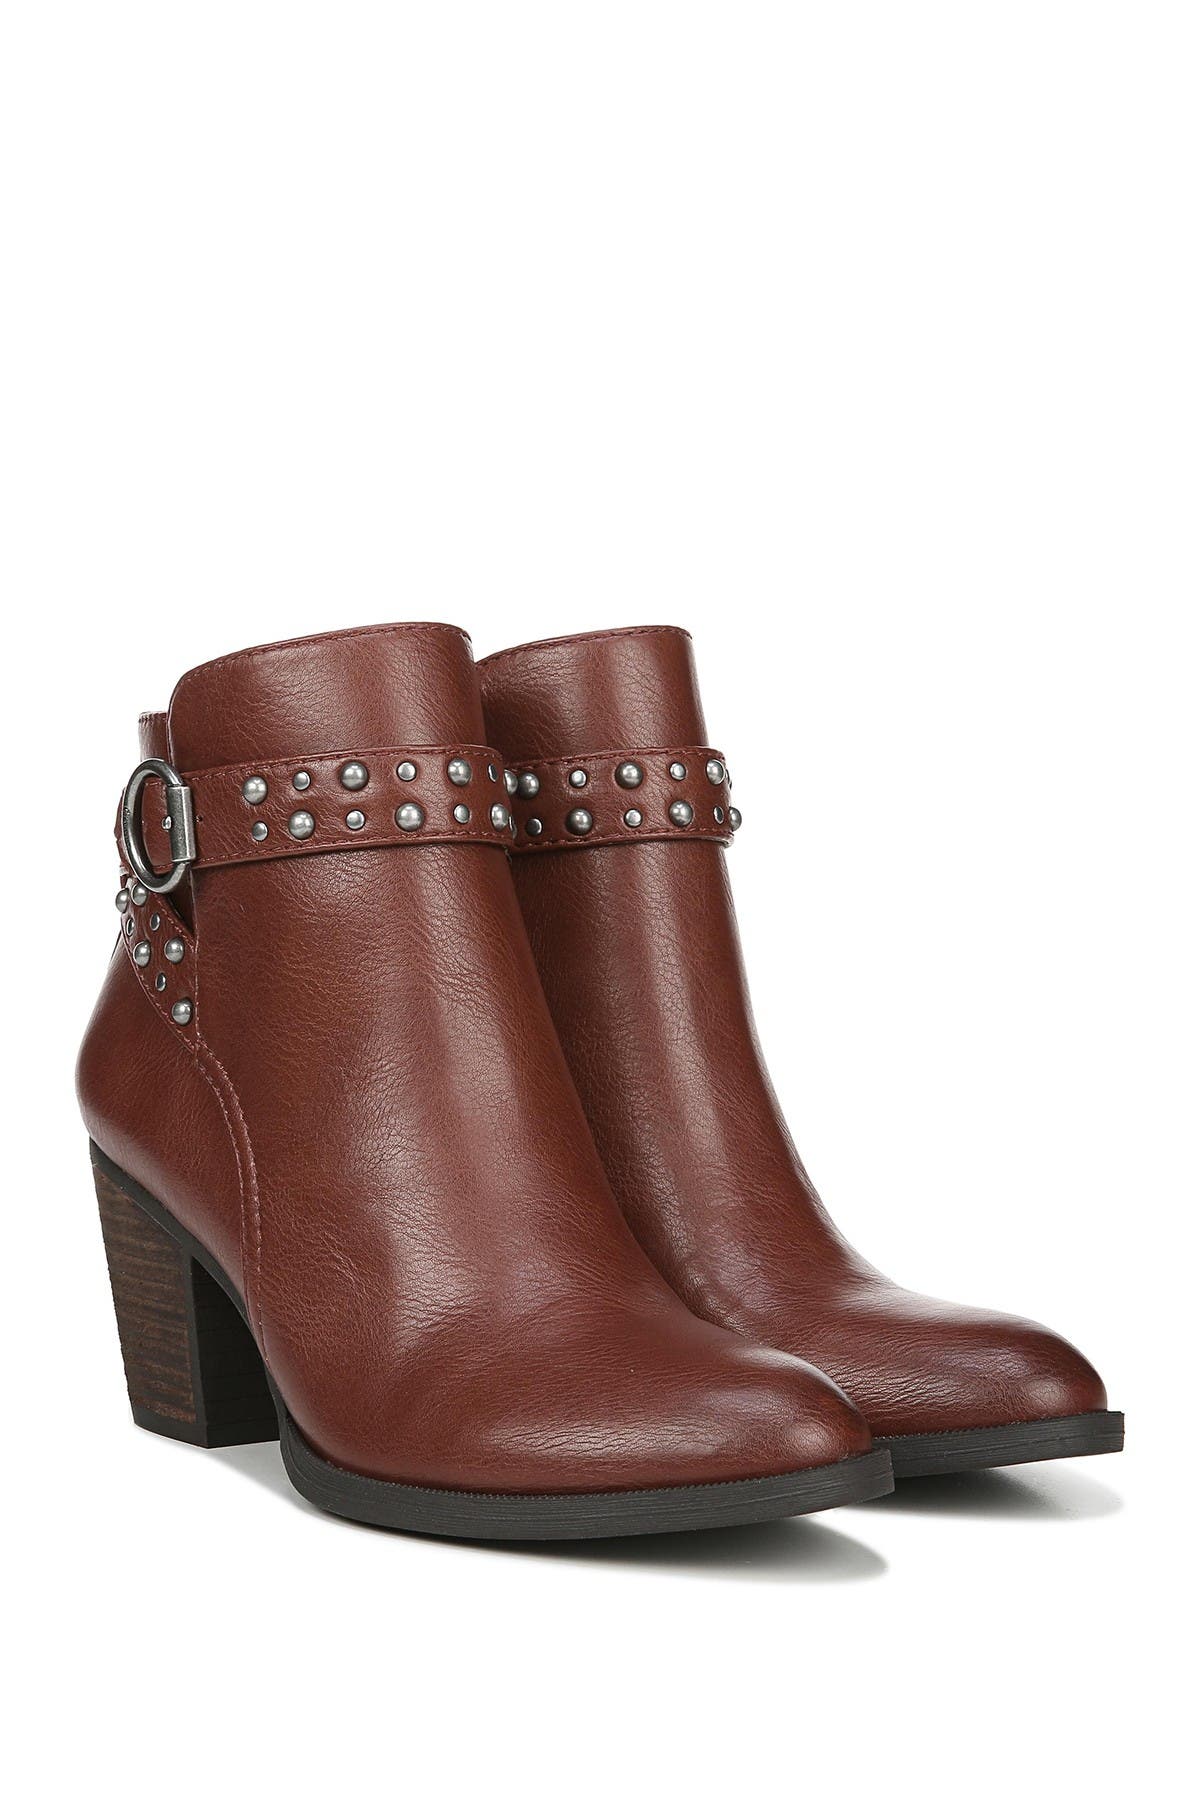 circus by sam edelman studded boots